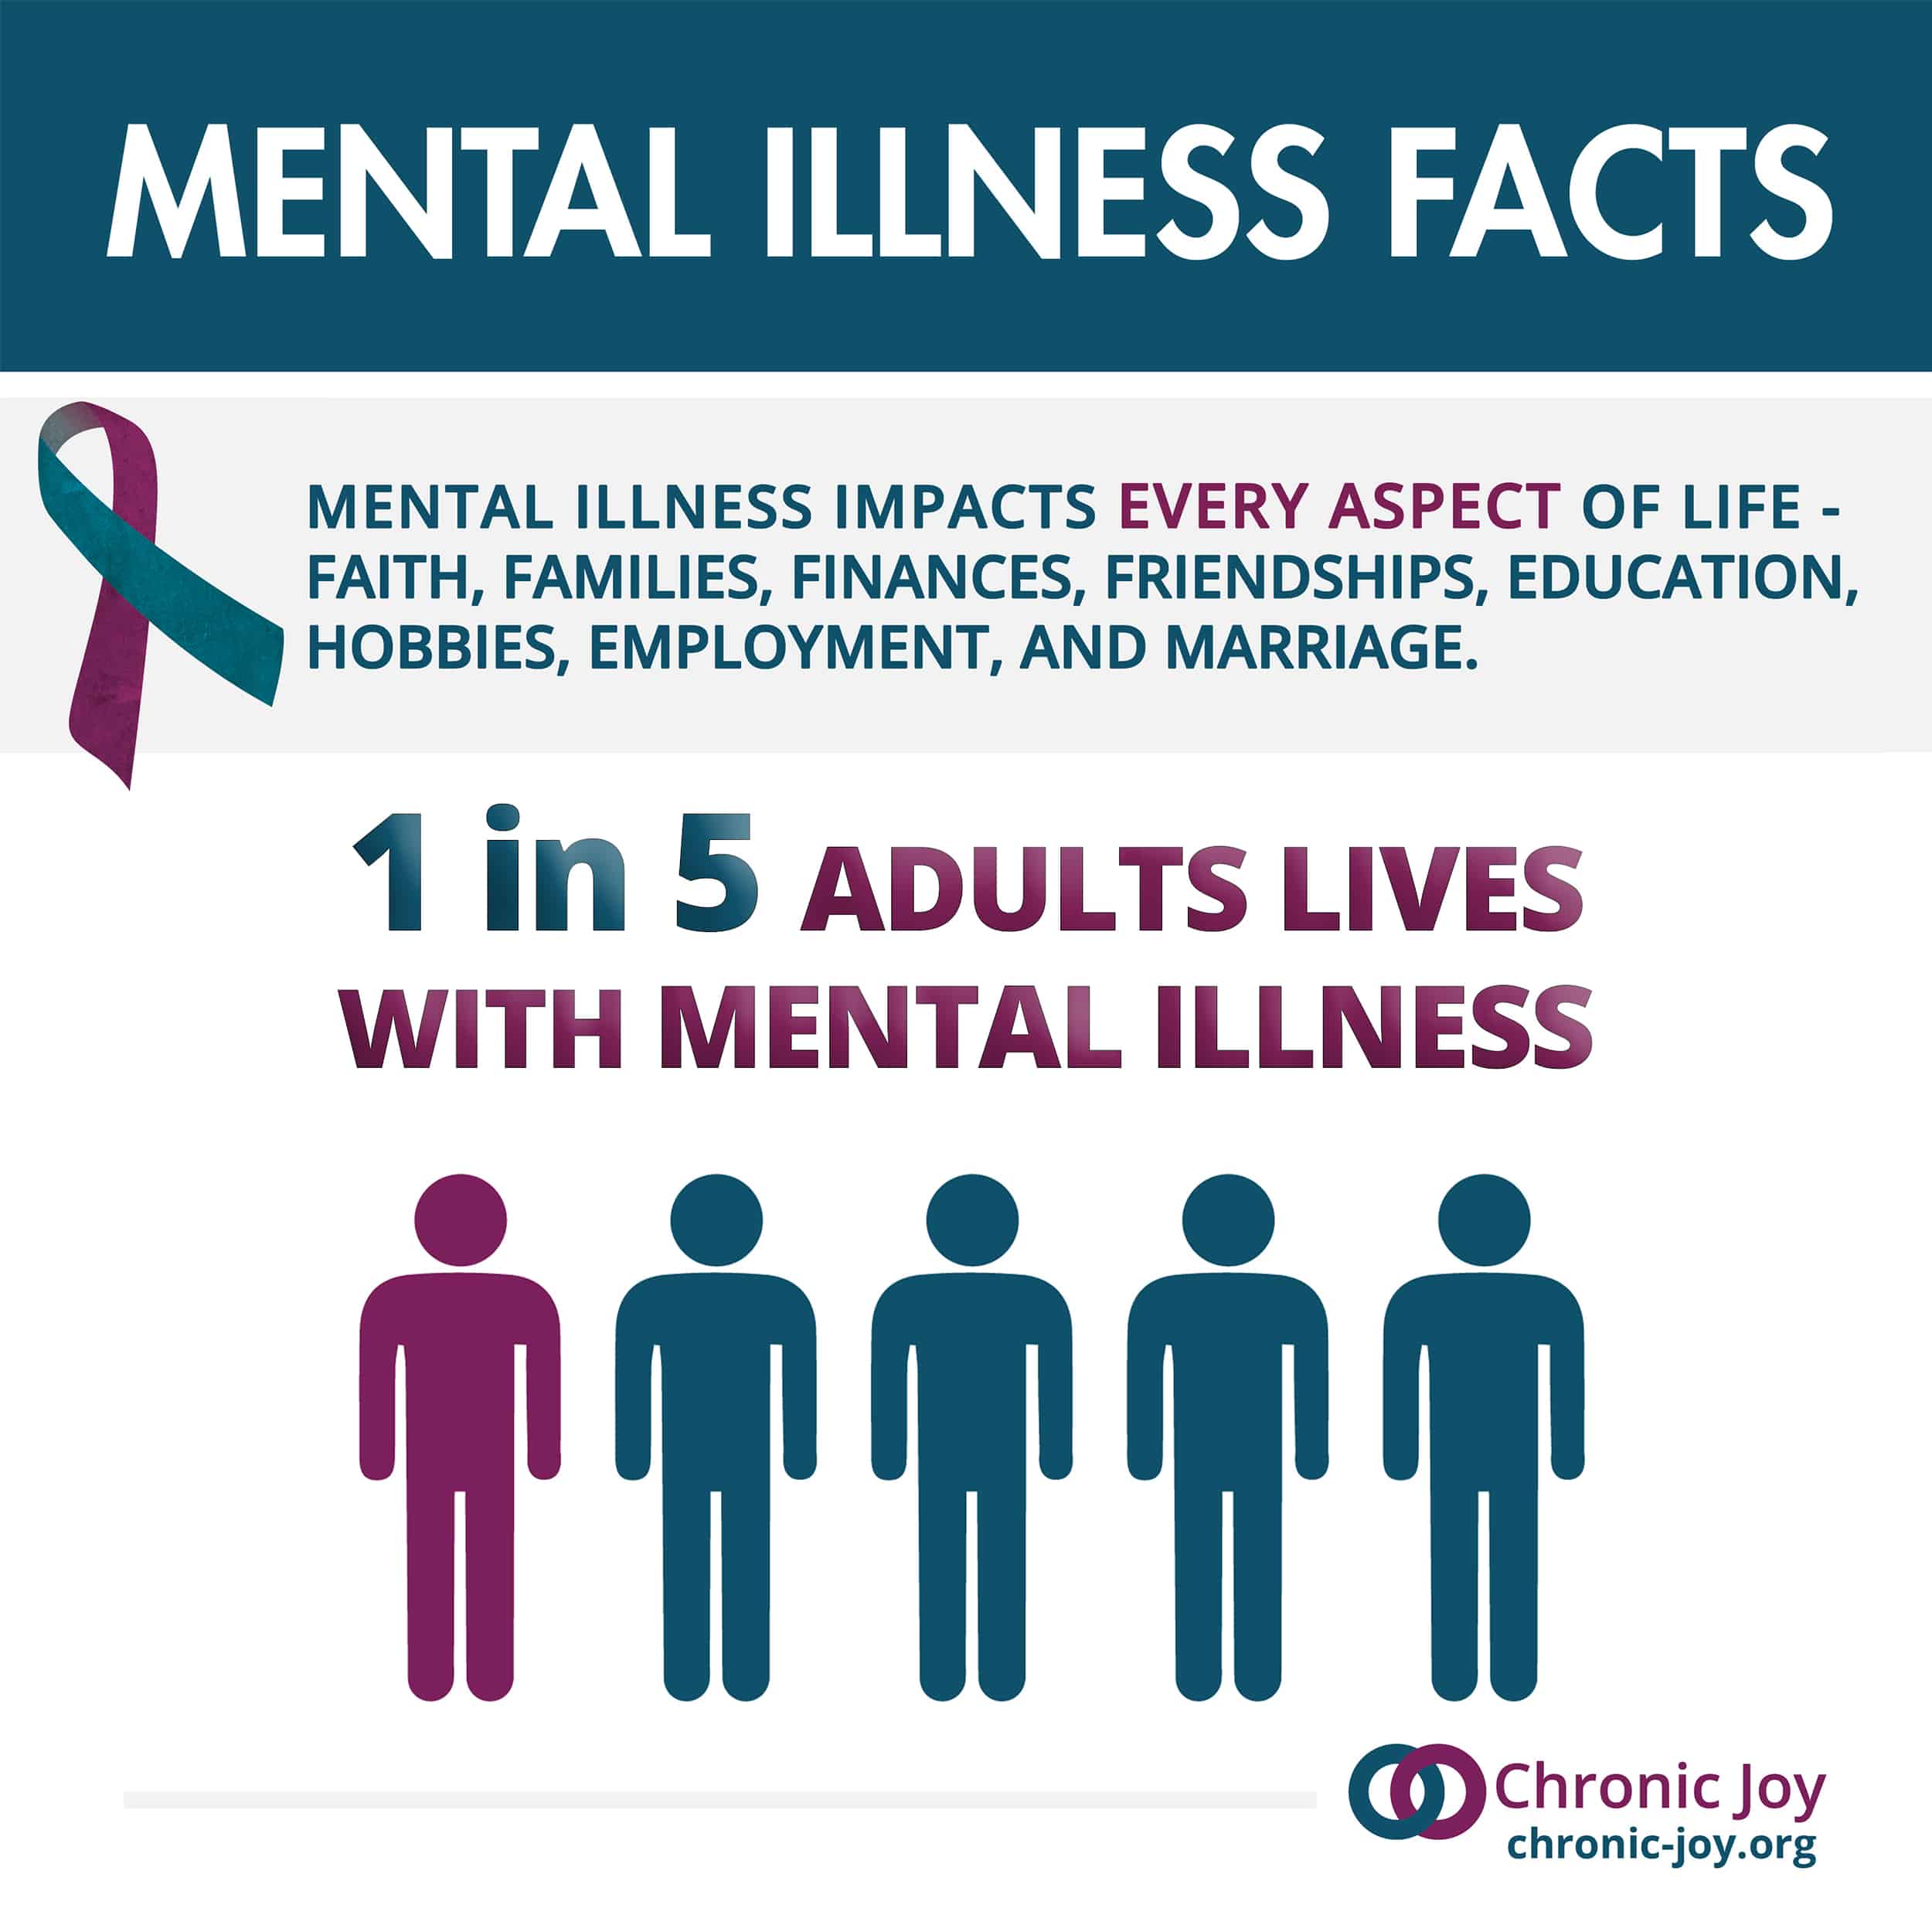 1 in 5 adults lives with chronic illness